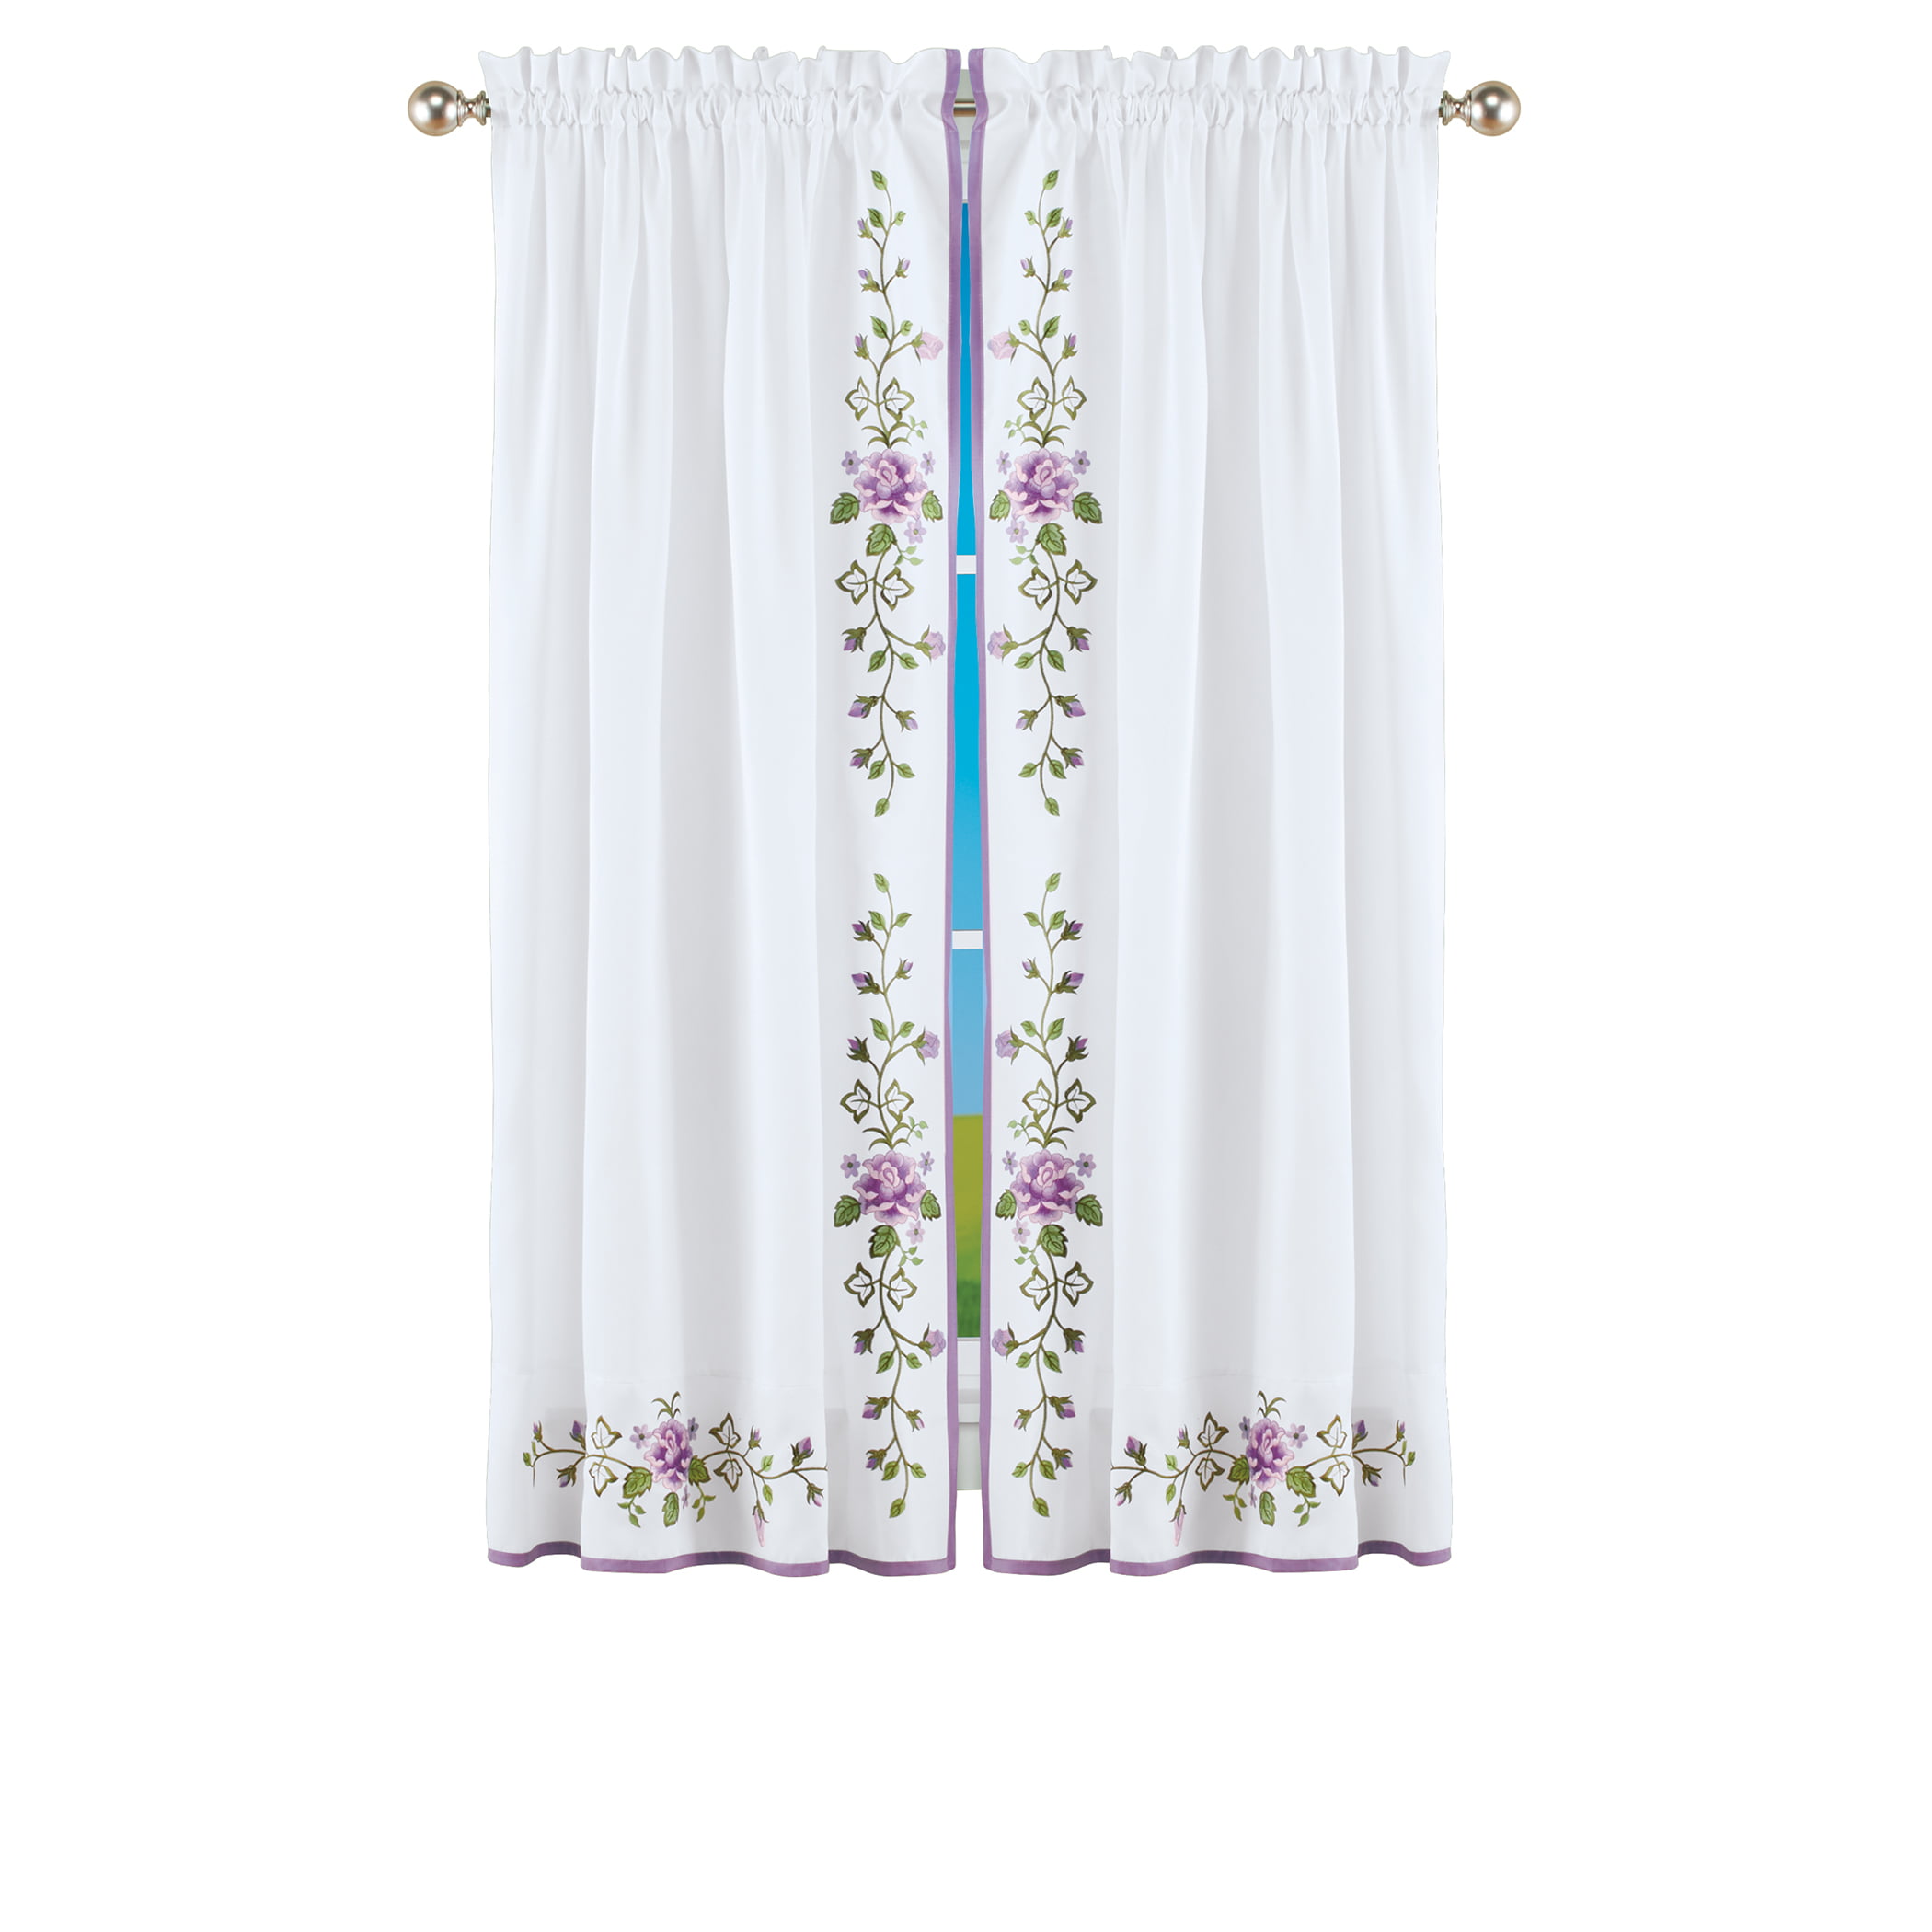 Details about   Cactus Flower and Butterfly Shower Curtain Set Fabric 71in 12hooks & Bath Mat 